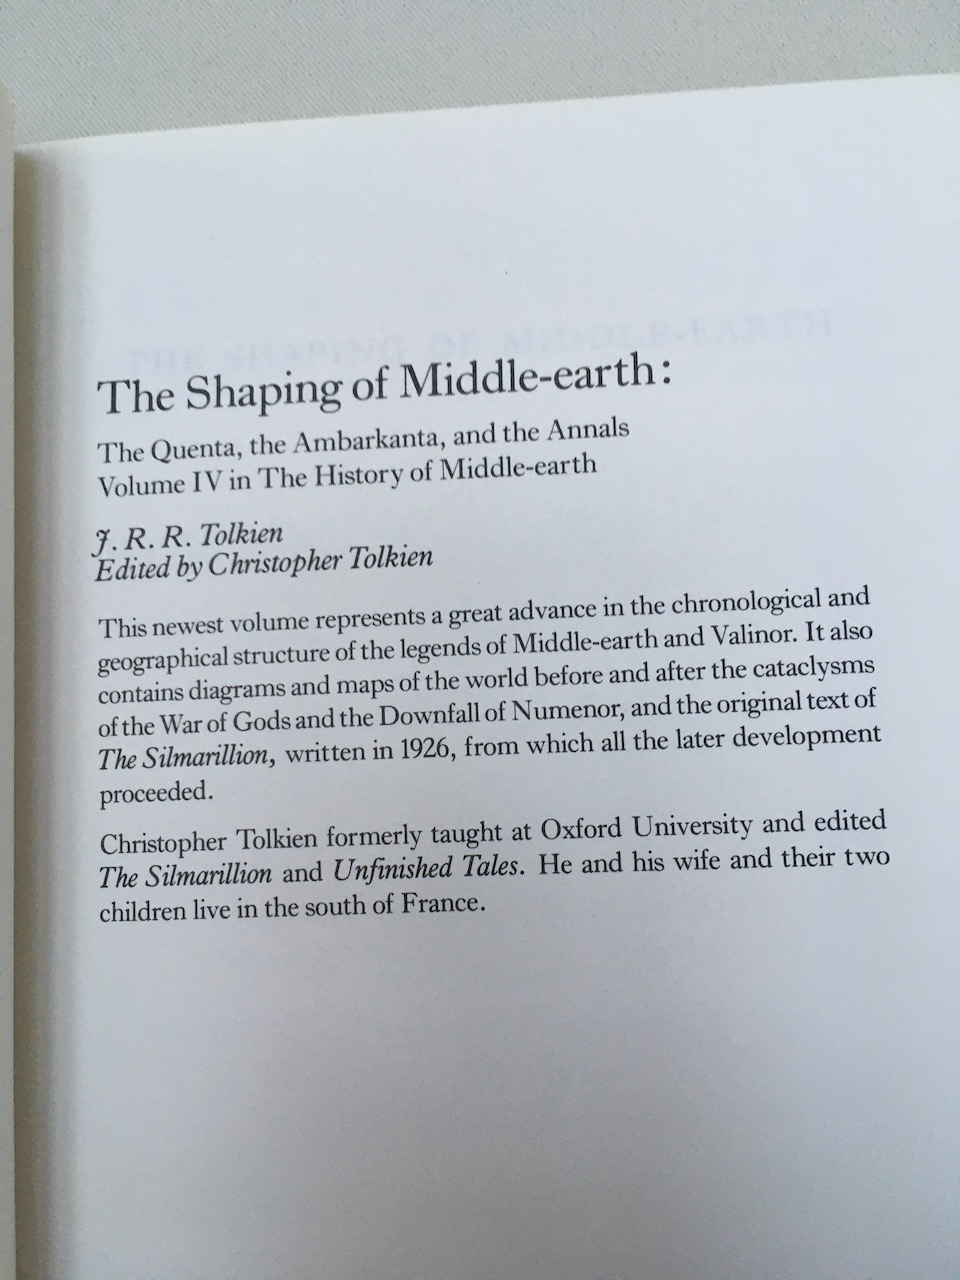 The Shaping of Middle-earth Uncorrected Proof US 1986 8